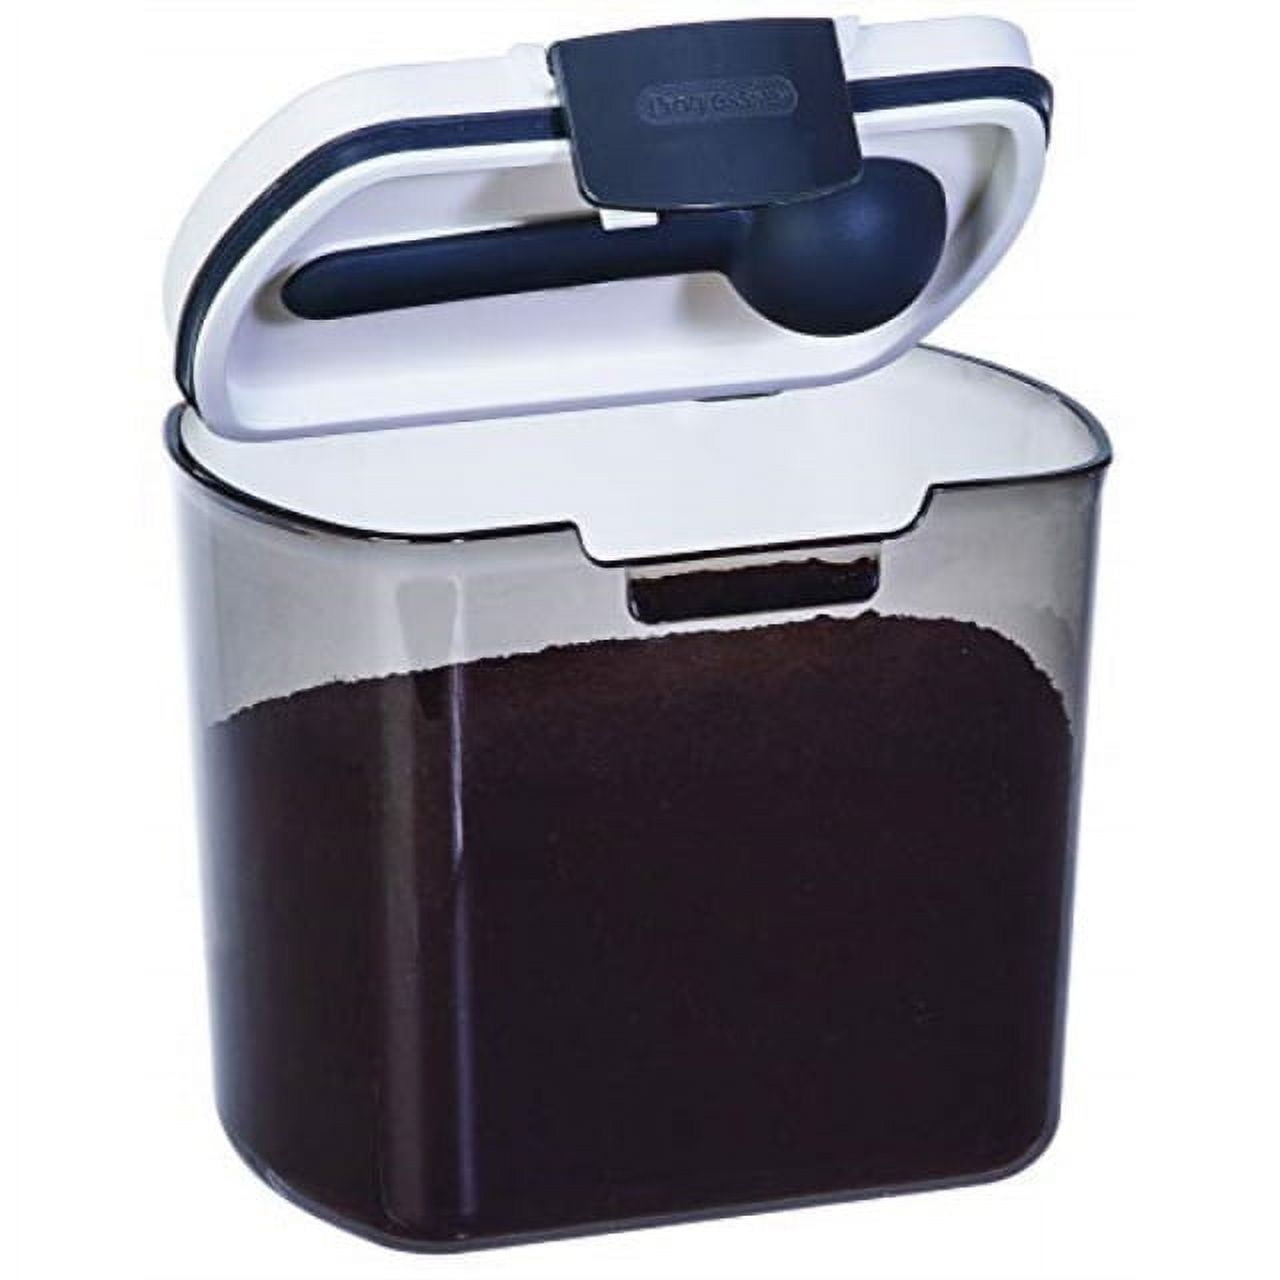 Progressive Large Coffee ProKeeper Storage Container, Tinted